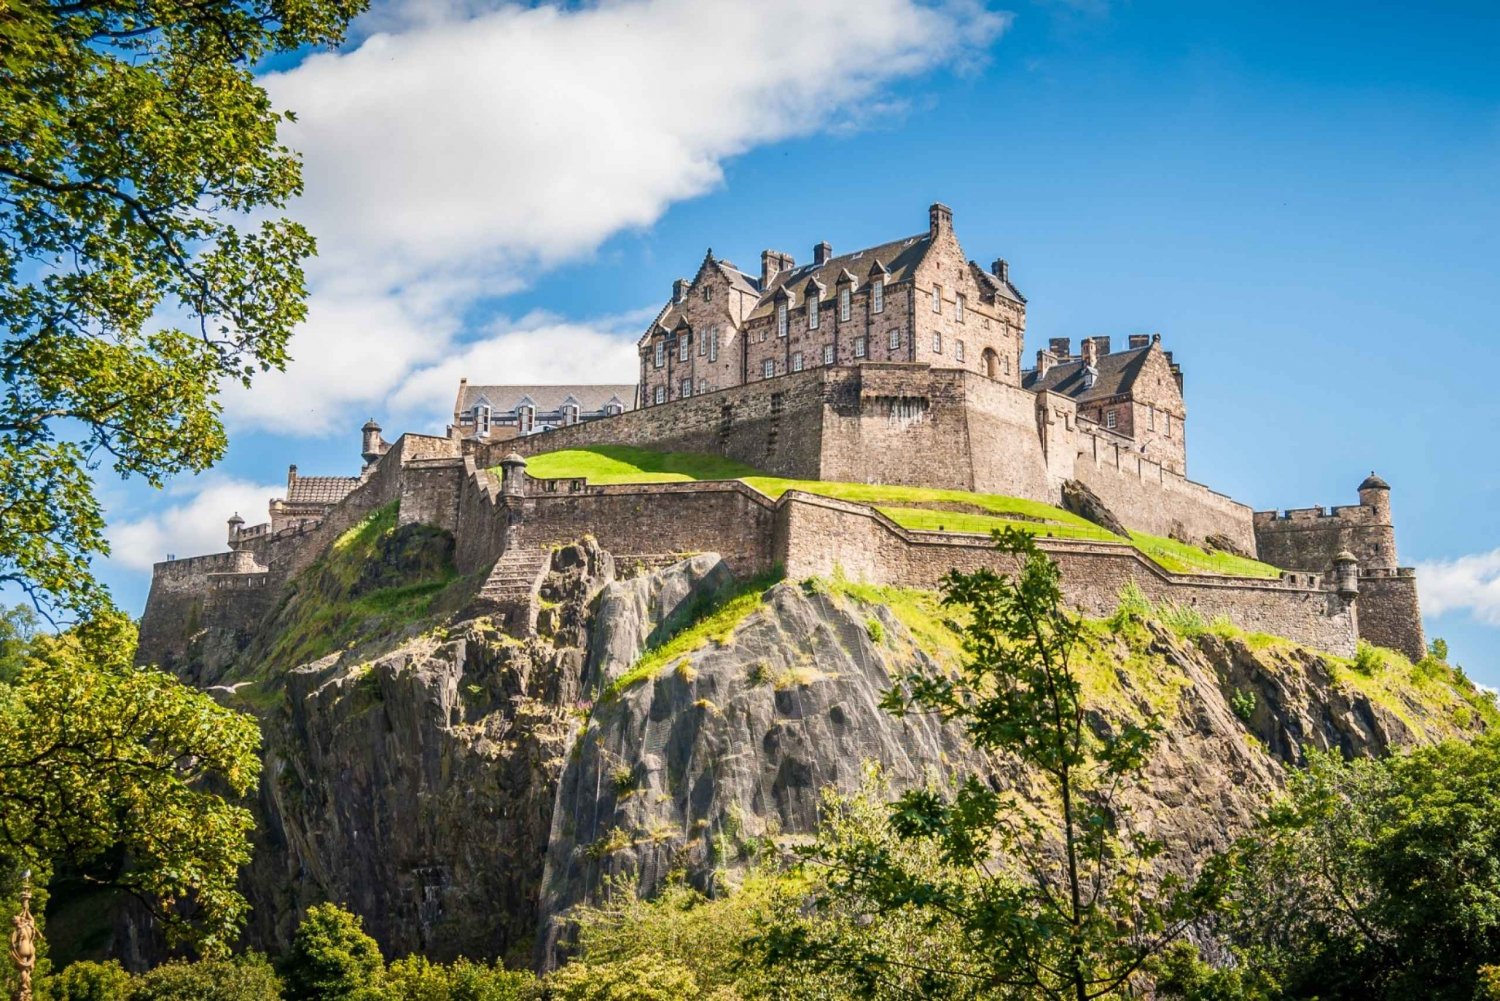 Edinburgh Castle: Highlights Tour with Tickets, Map & Guide